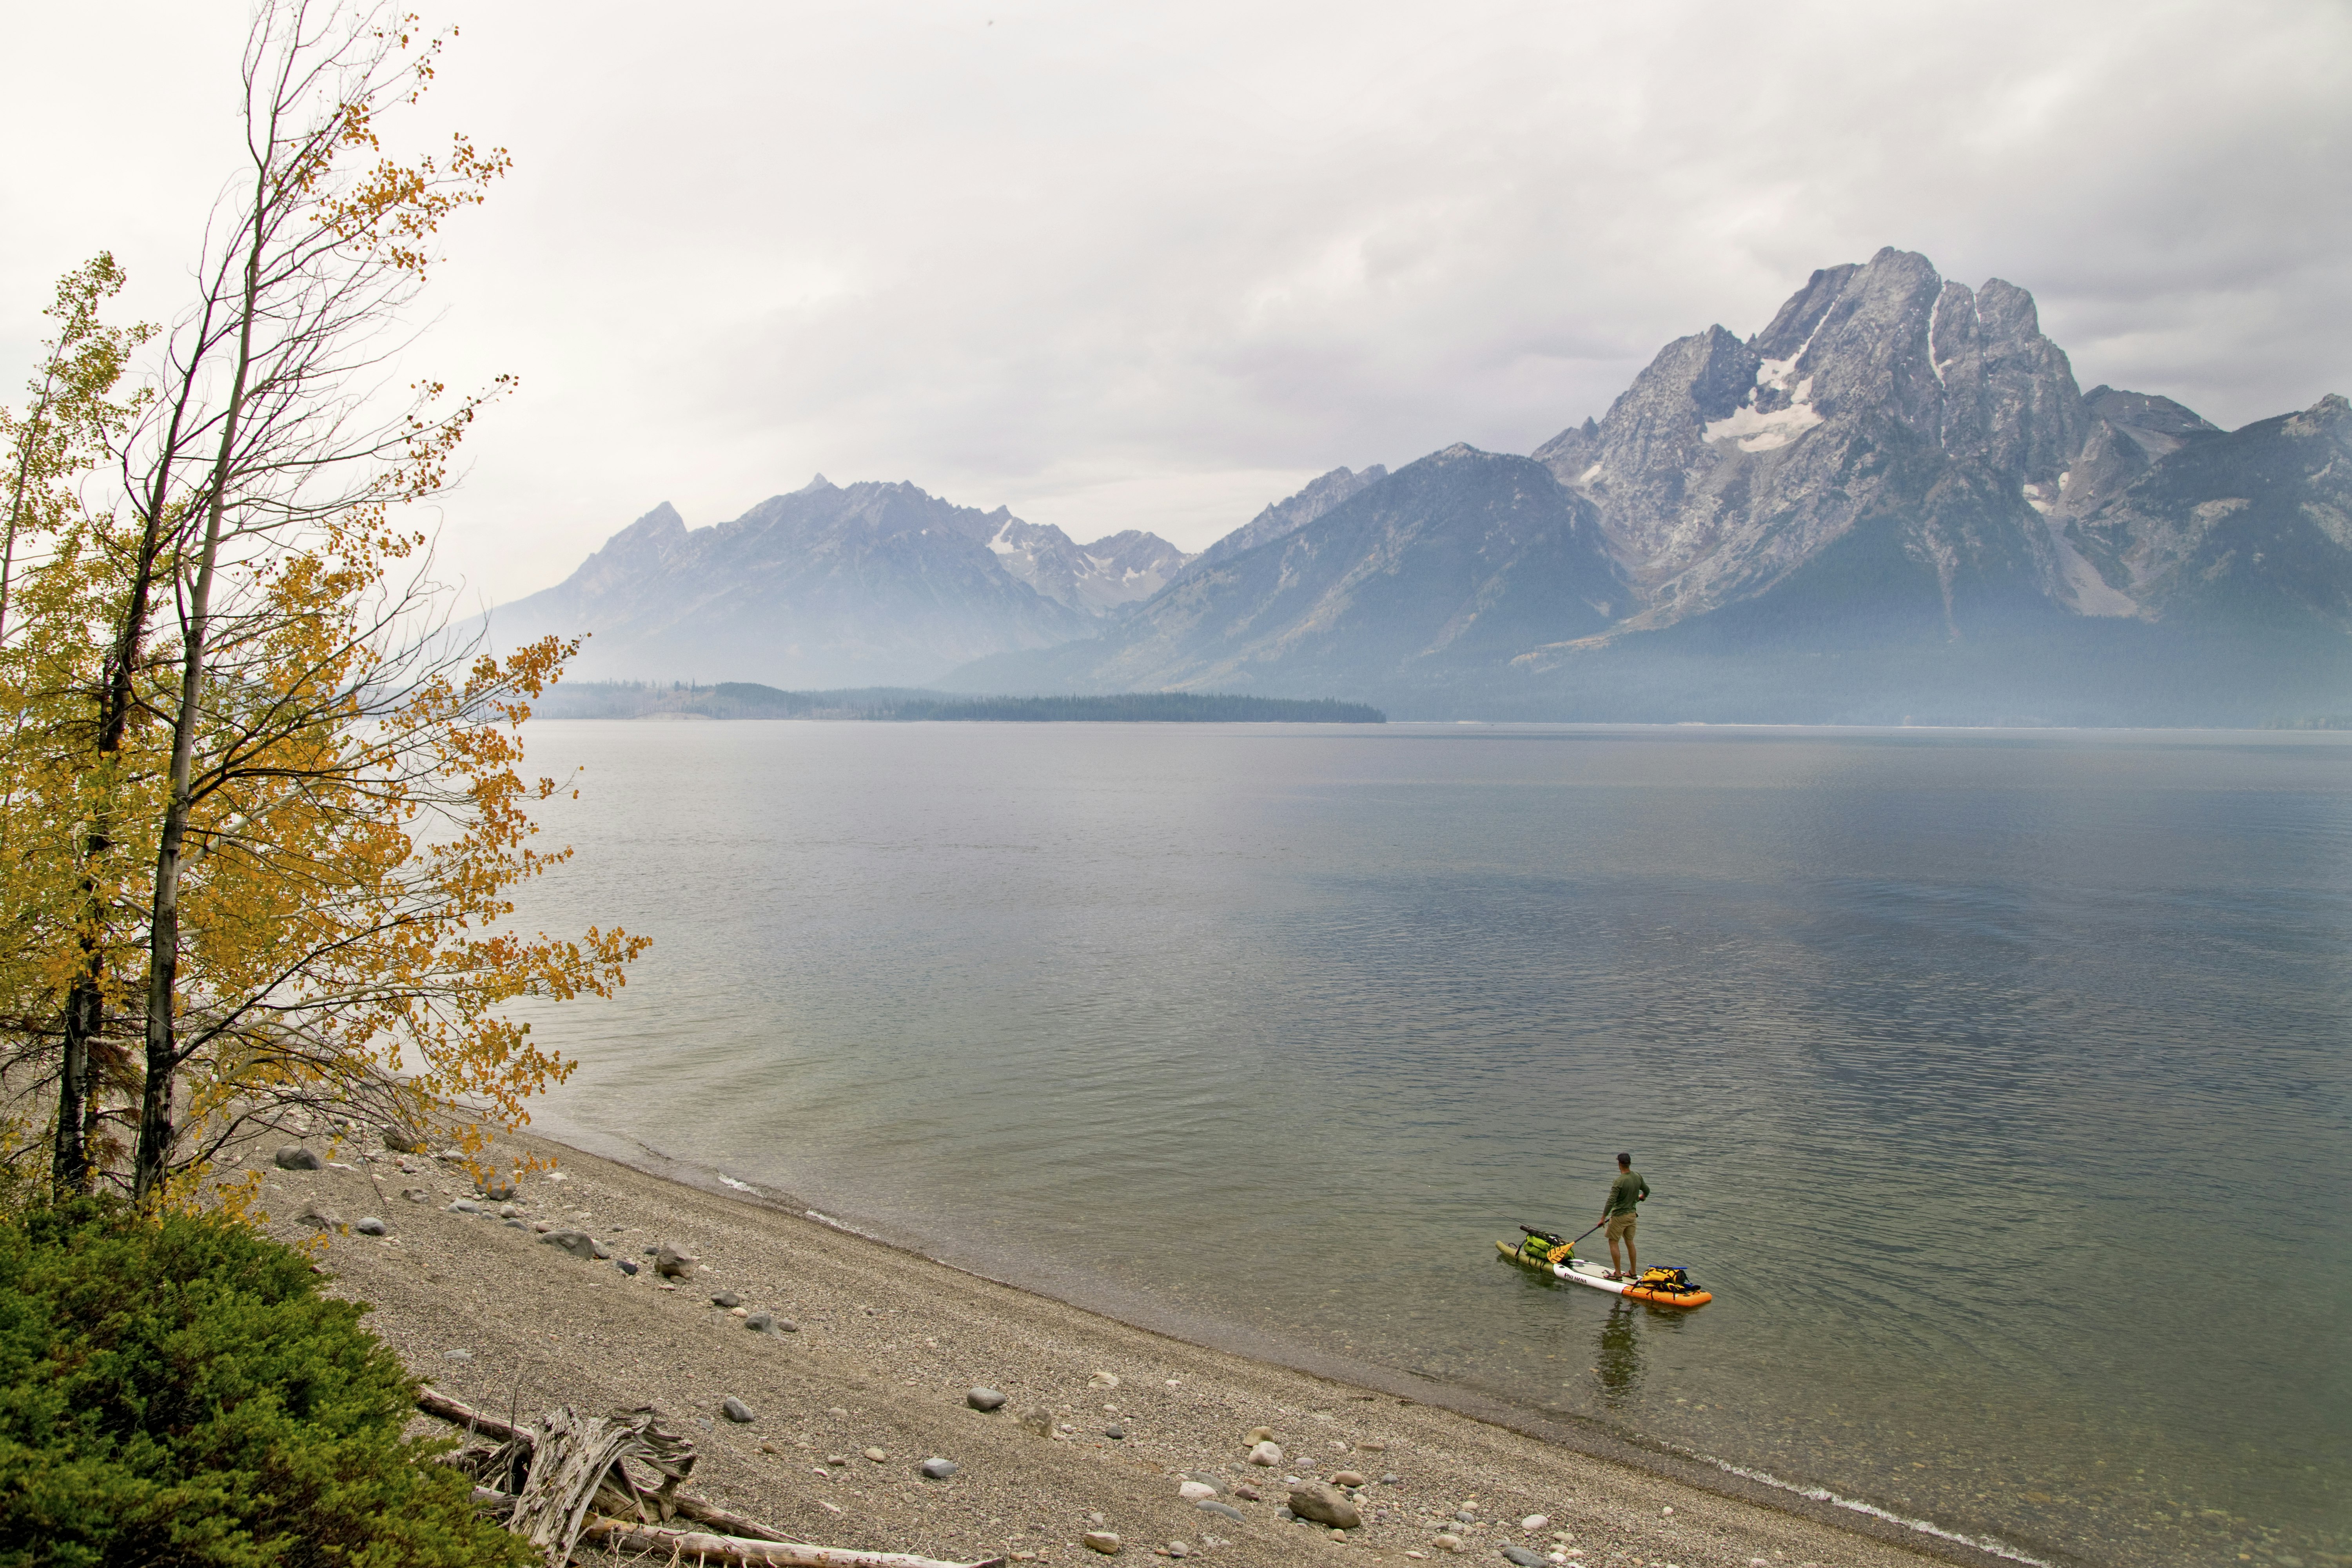 A man paddles a paddleboard across a misty lake with a mountain rising in the background at Grand Teton National Park; Stand up paddle boarding